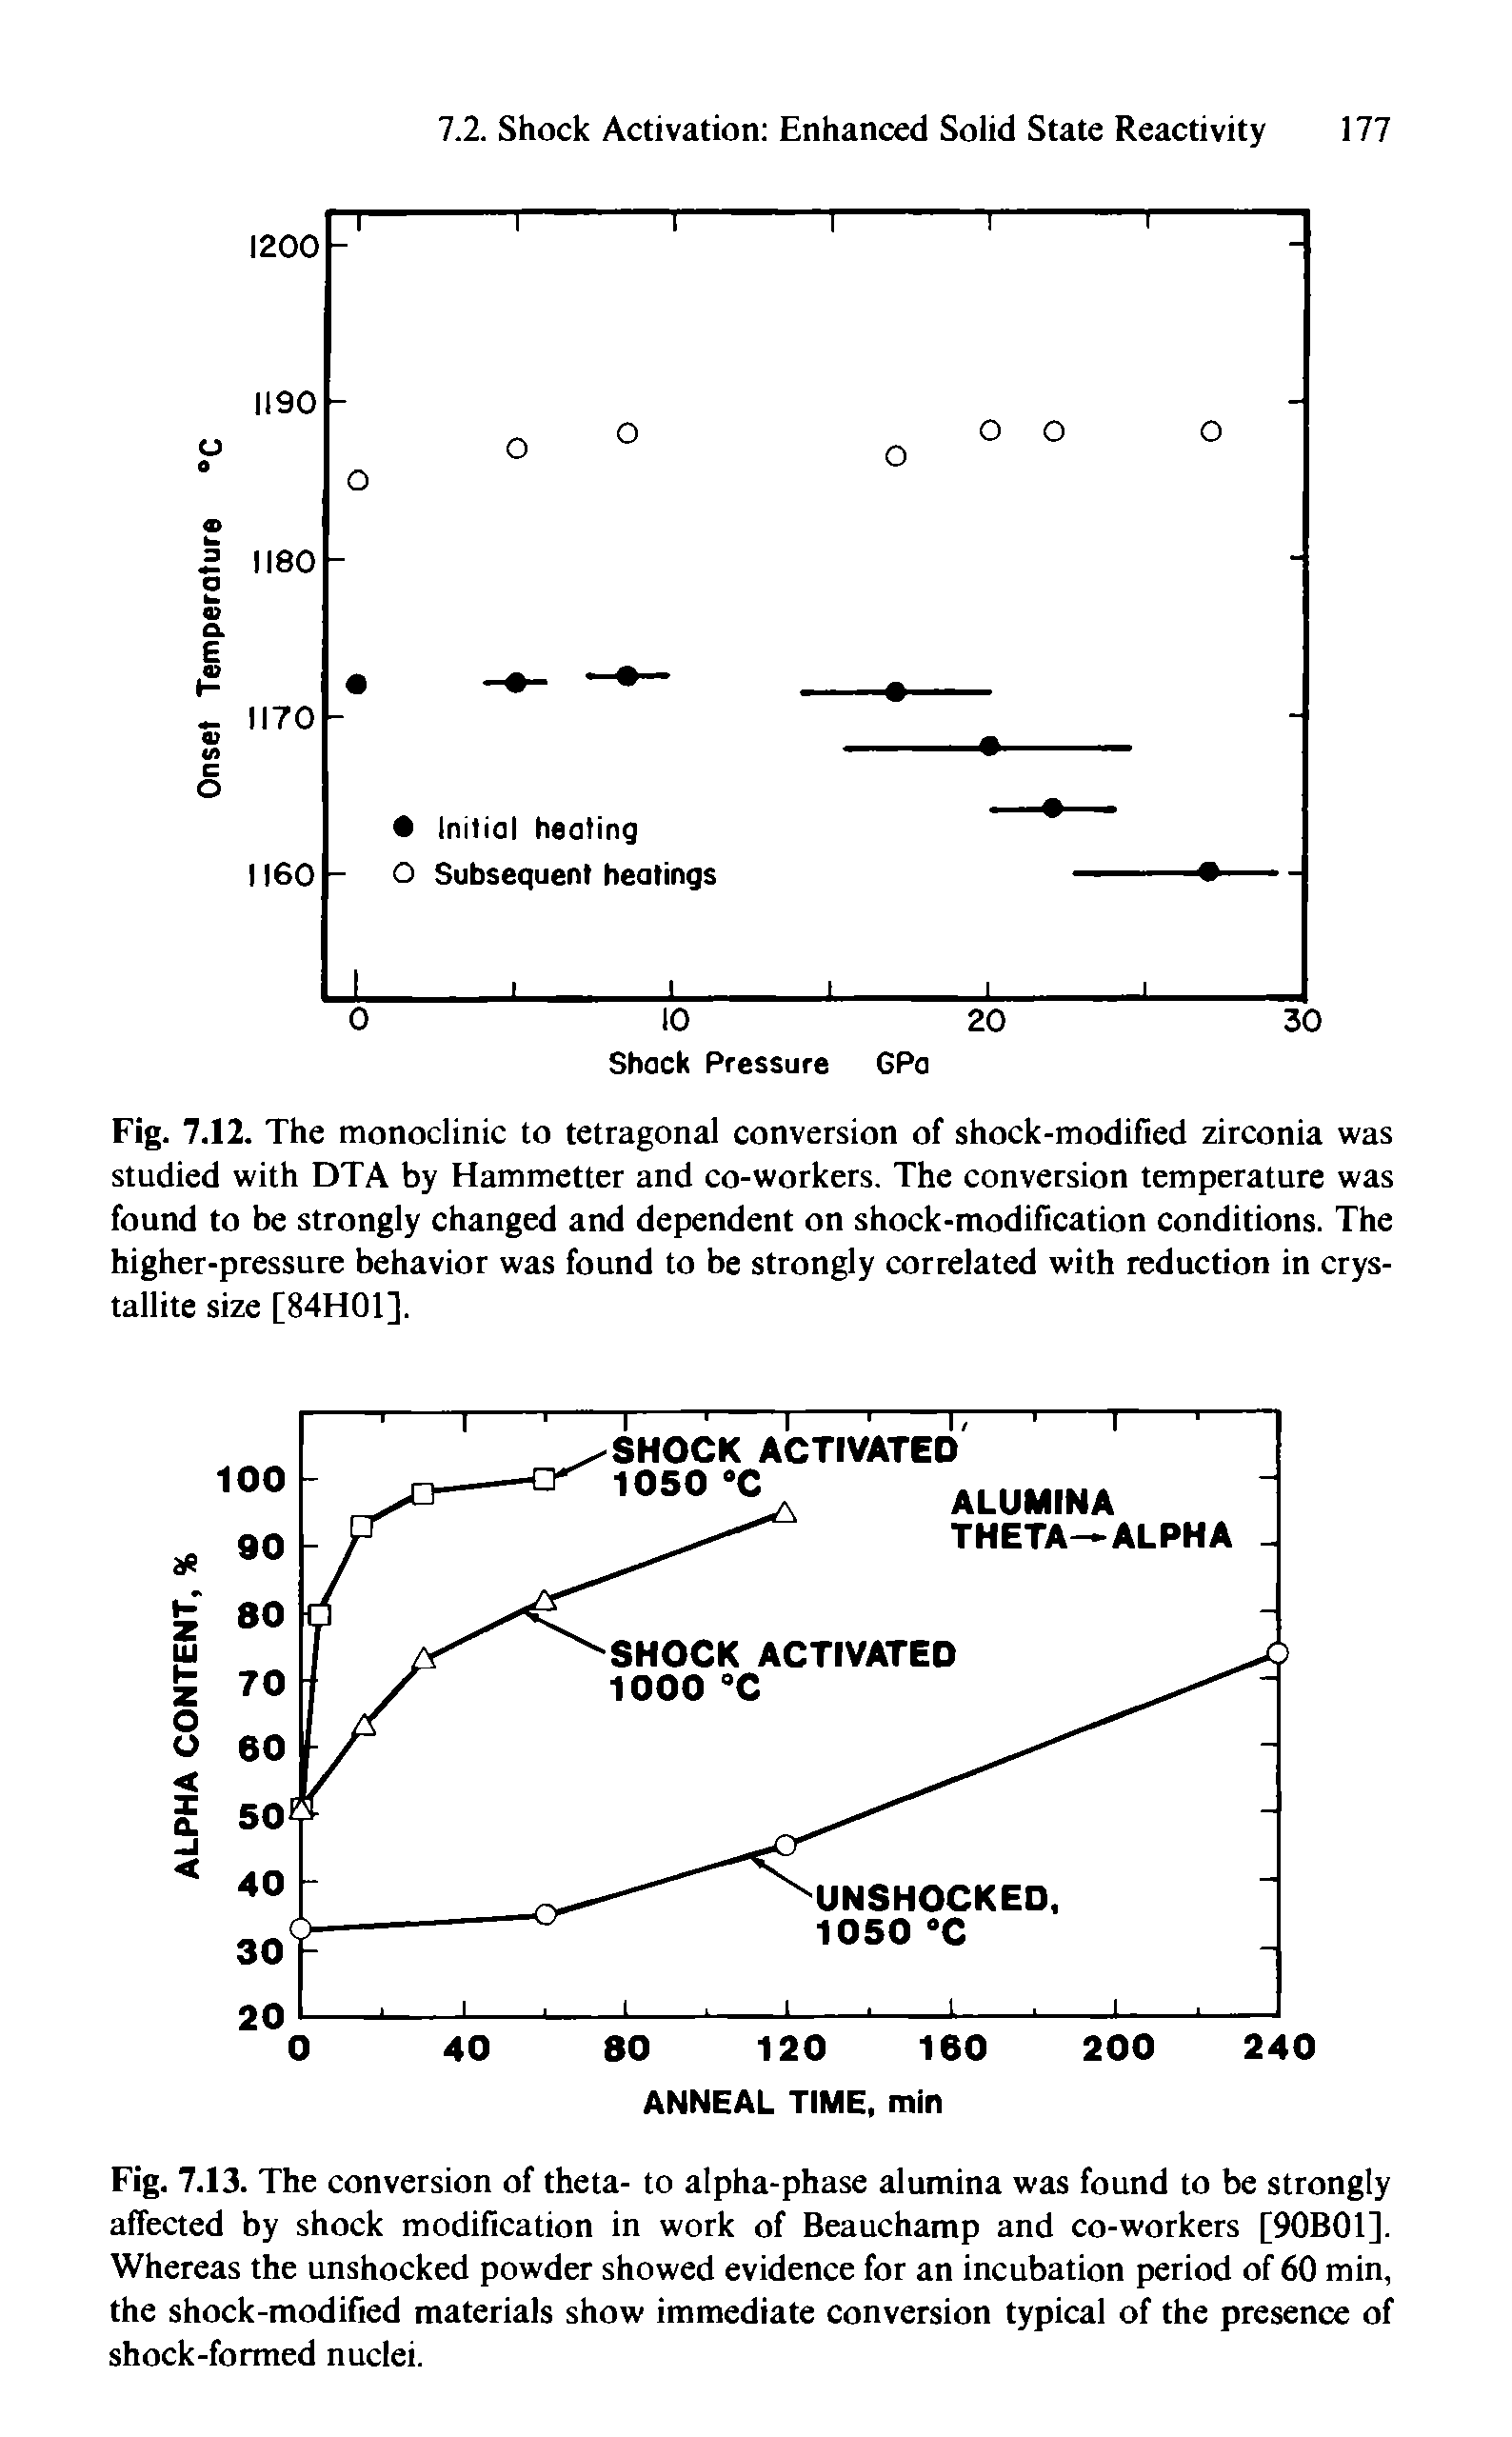 Fig. 7.13. The conversion of theta- to alpha-phase alumina was found to be strongly affected by shock modification in work of Beauchamp and co-workers [90B01]. Whereas the unshocked powder showed evidence for an incubation period of 60 min, the shock-modified materials show immediate conversion typical of the presence of shock-formed nuclei.